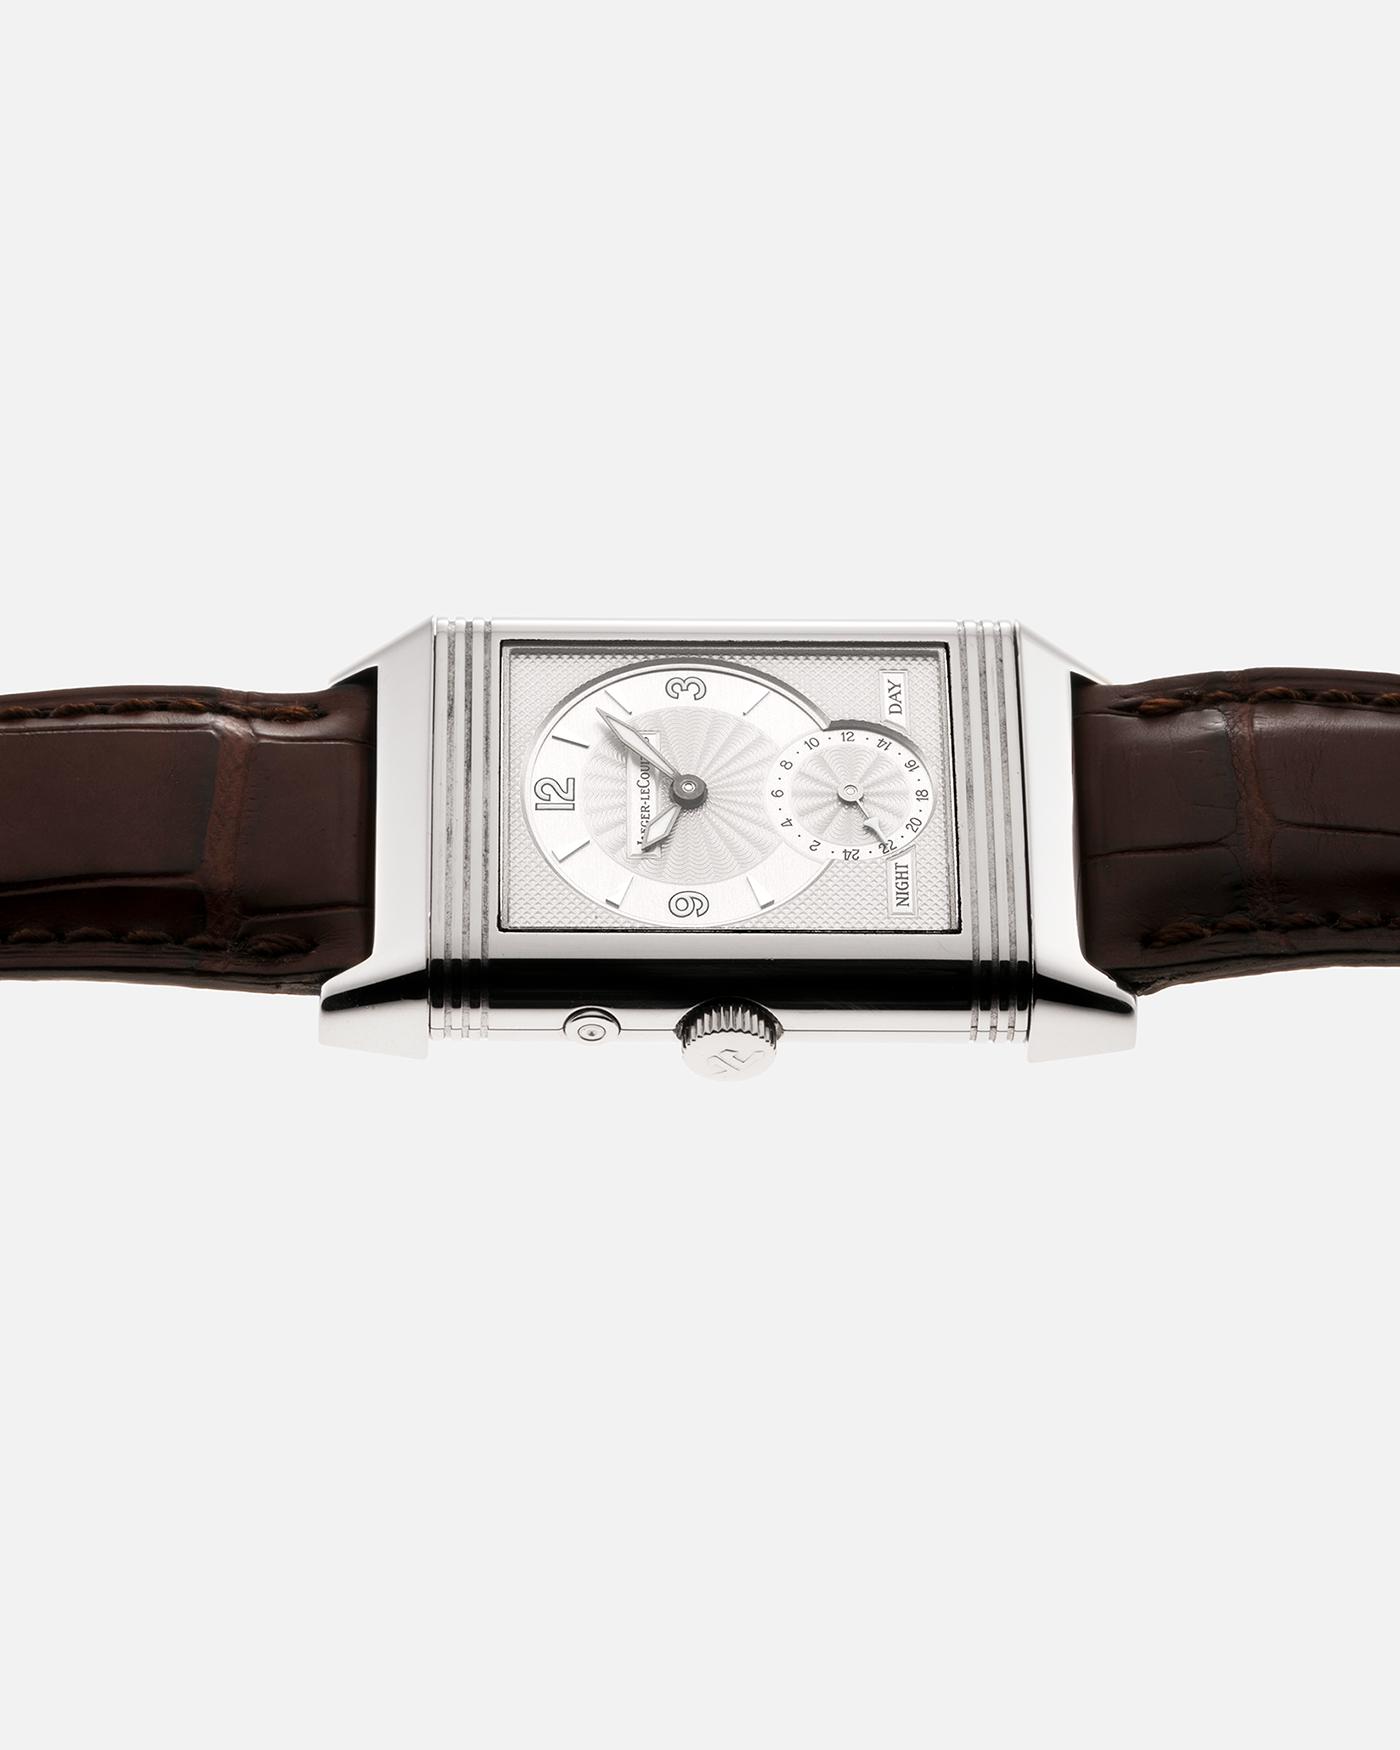 Brand: Jaeger-LeCoultre Year: 2000’s Model: Reverso Duo Night and Day Reference Number: 270.3.54 Material: 18-carat White Gold Movement: JLC Cal. 854, Manual-Wind Case Diameter: 42mm x 26mm Bracelet/Strap: Jaeger LeCoultre Brown Alligator Leather Strap with Signed 18-carat White Gold Deployant Clasp